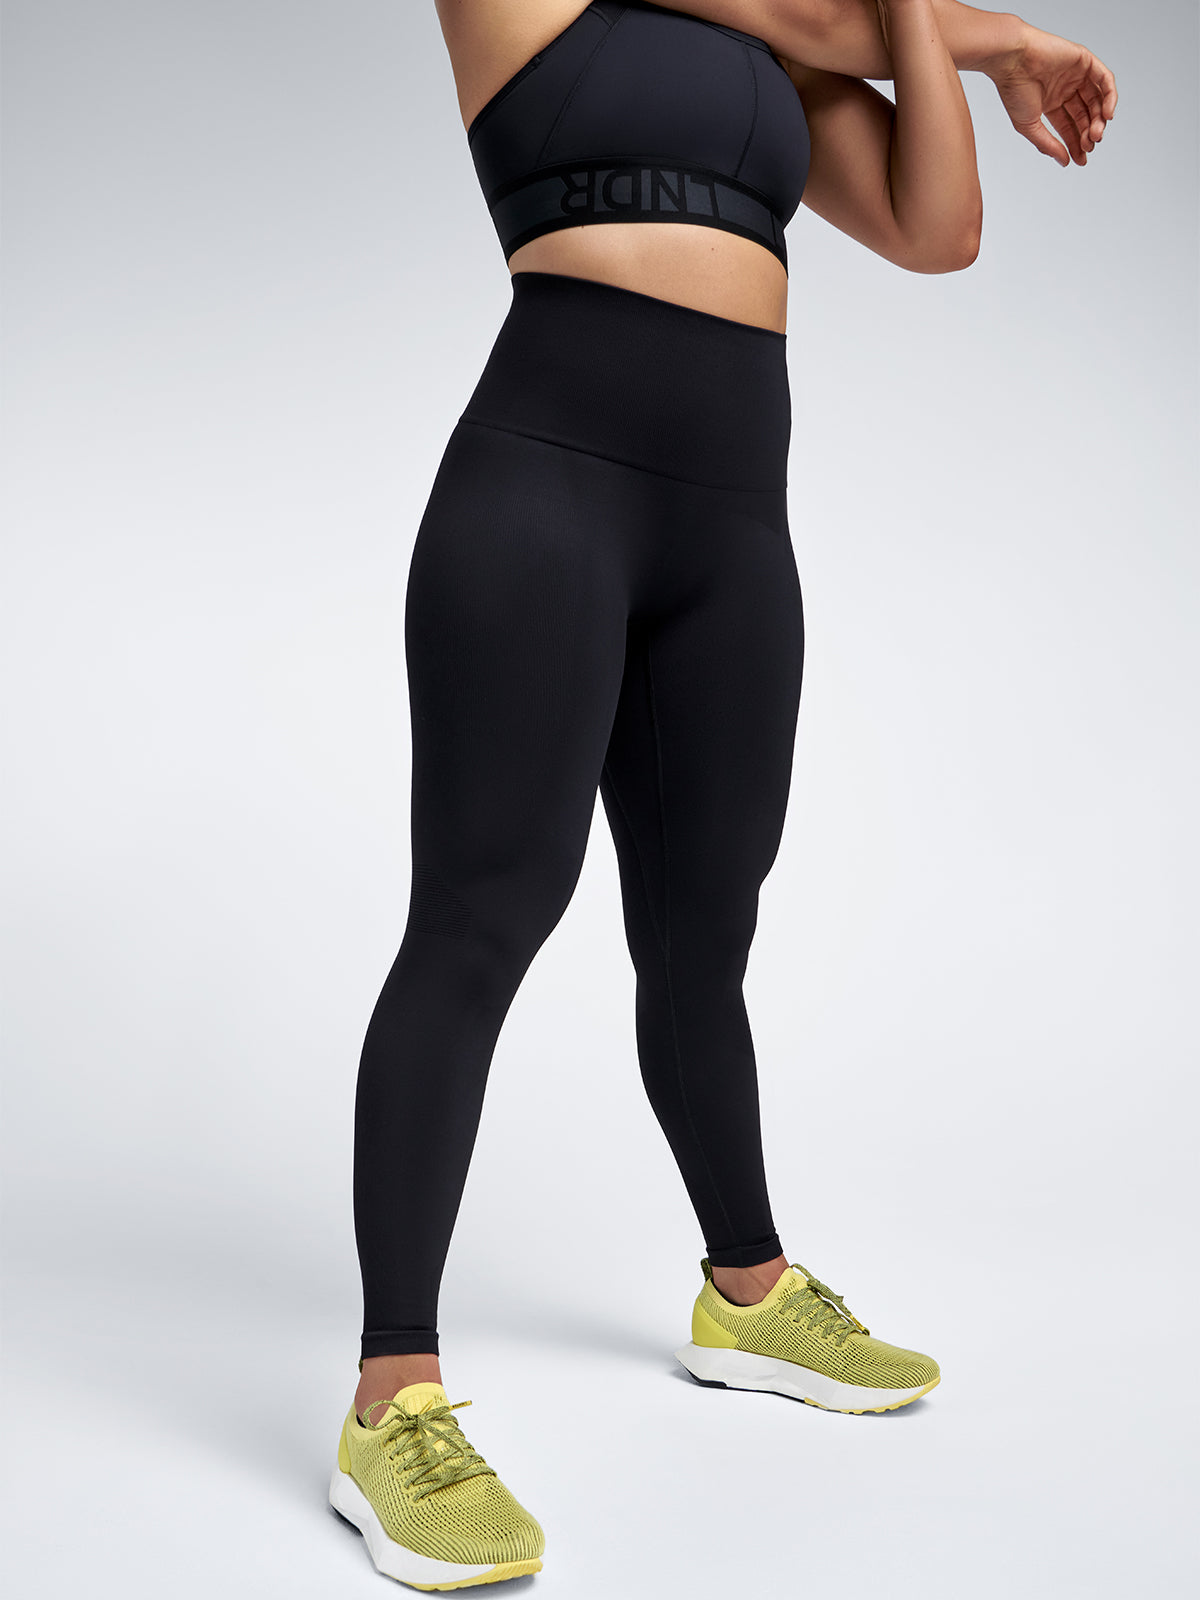 Expensive Workout Leggings